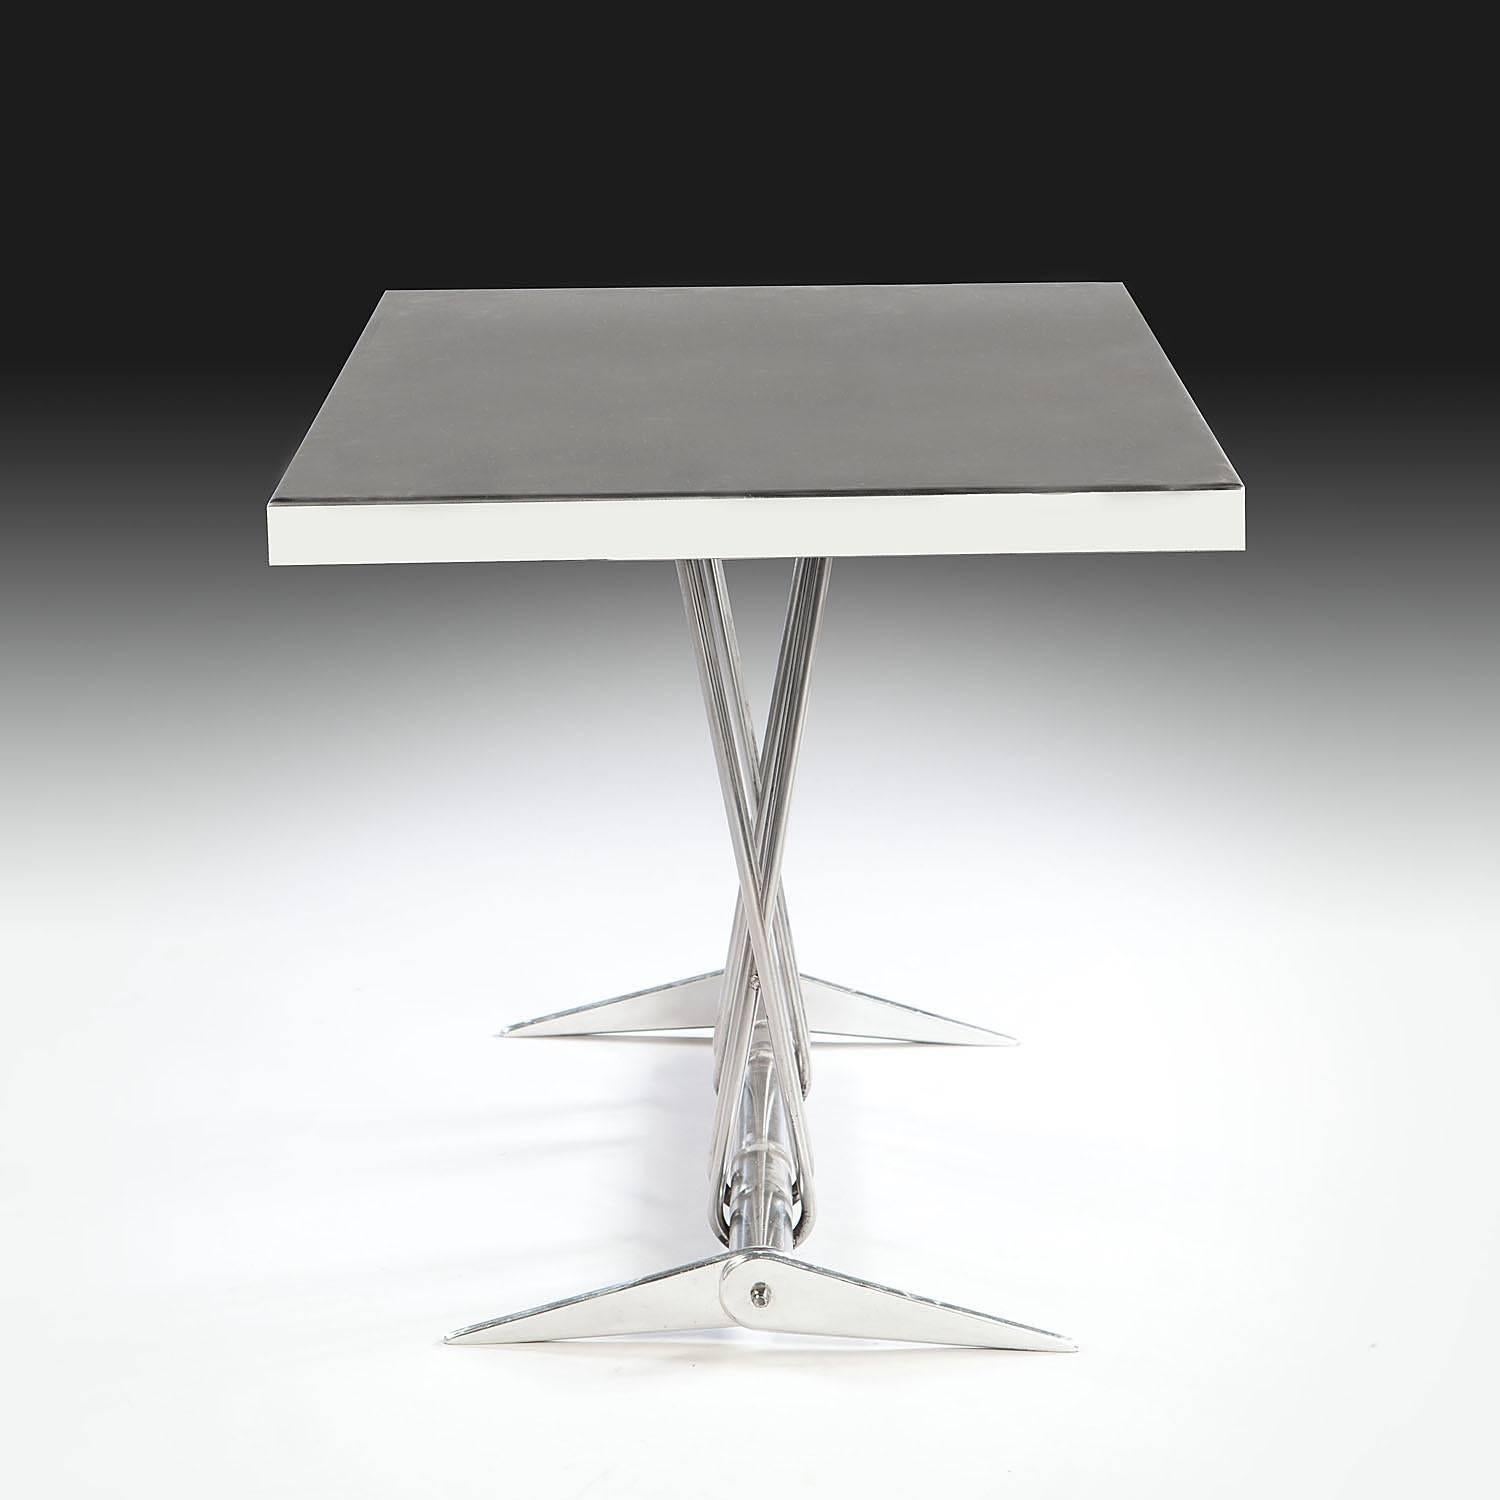 French Modernist Polished Steel Centre Table In Excellent Condition For Sale In London, by appointment only